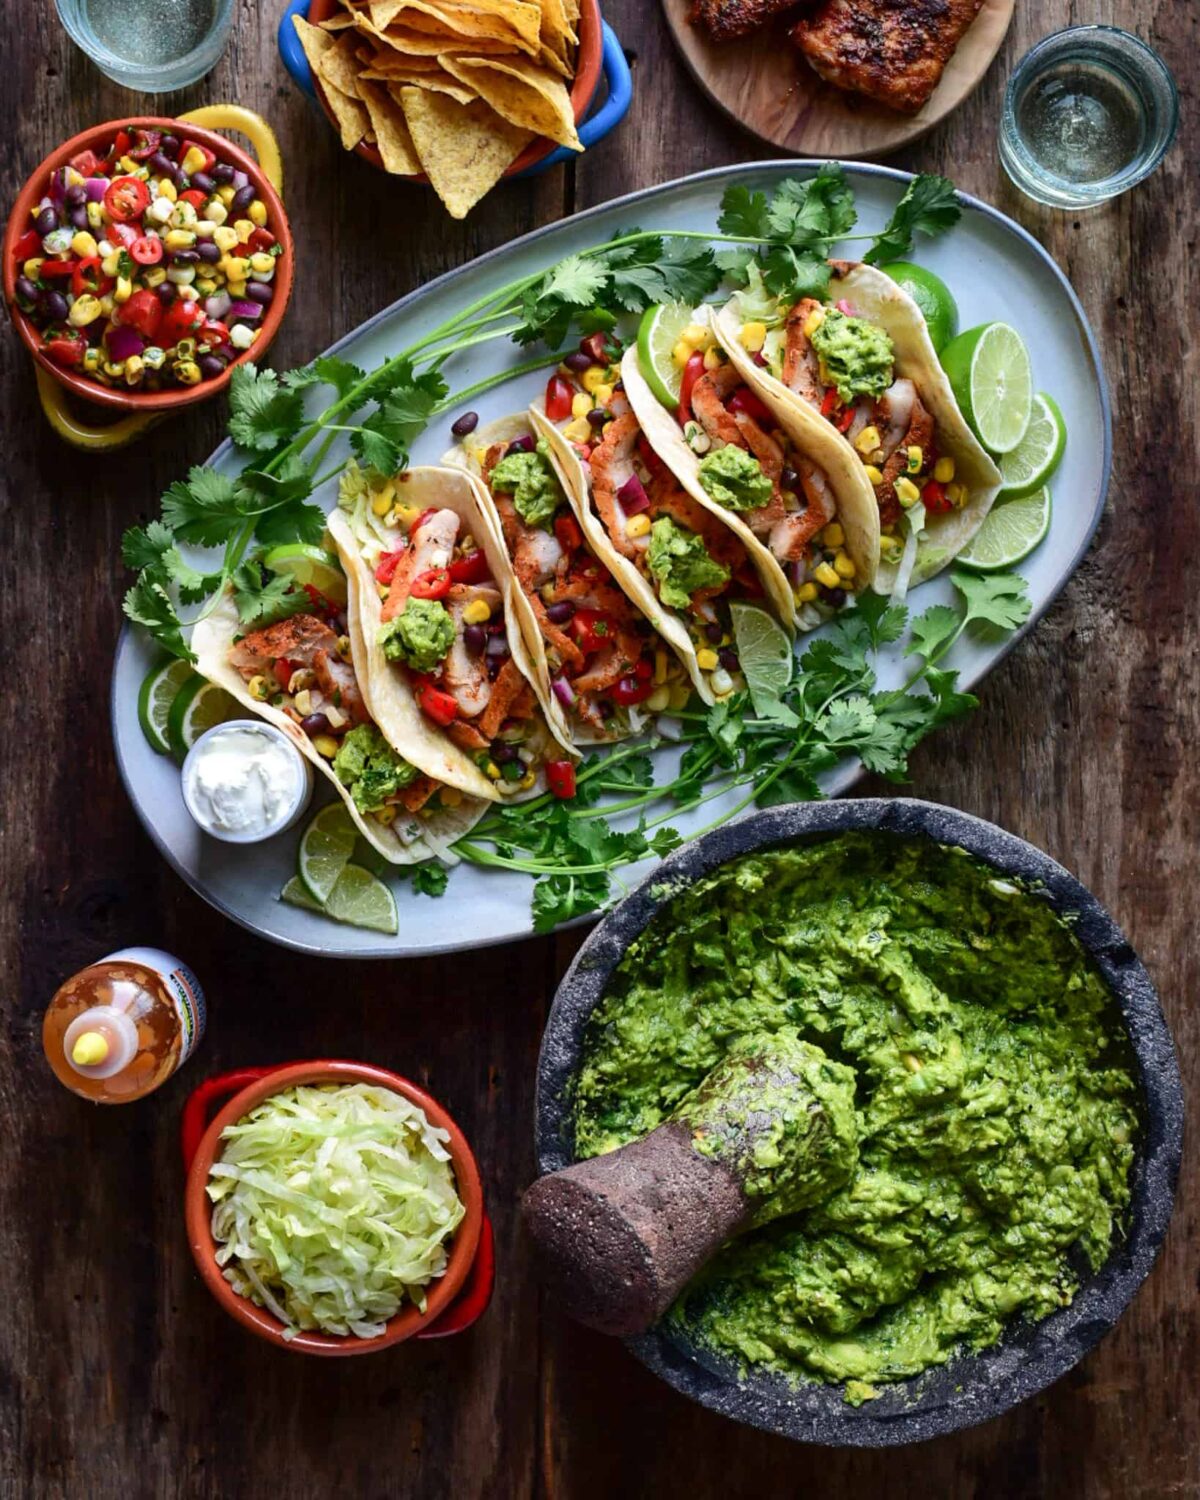 A platter of chicken tacos, a mortar and pestle with guacamole, served with bowls of various fixings.